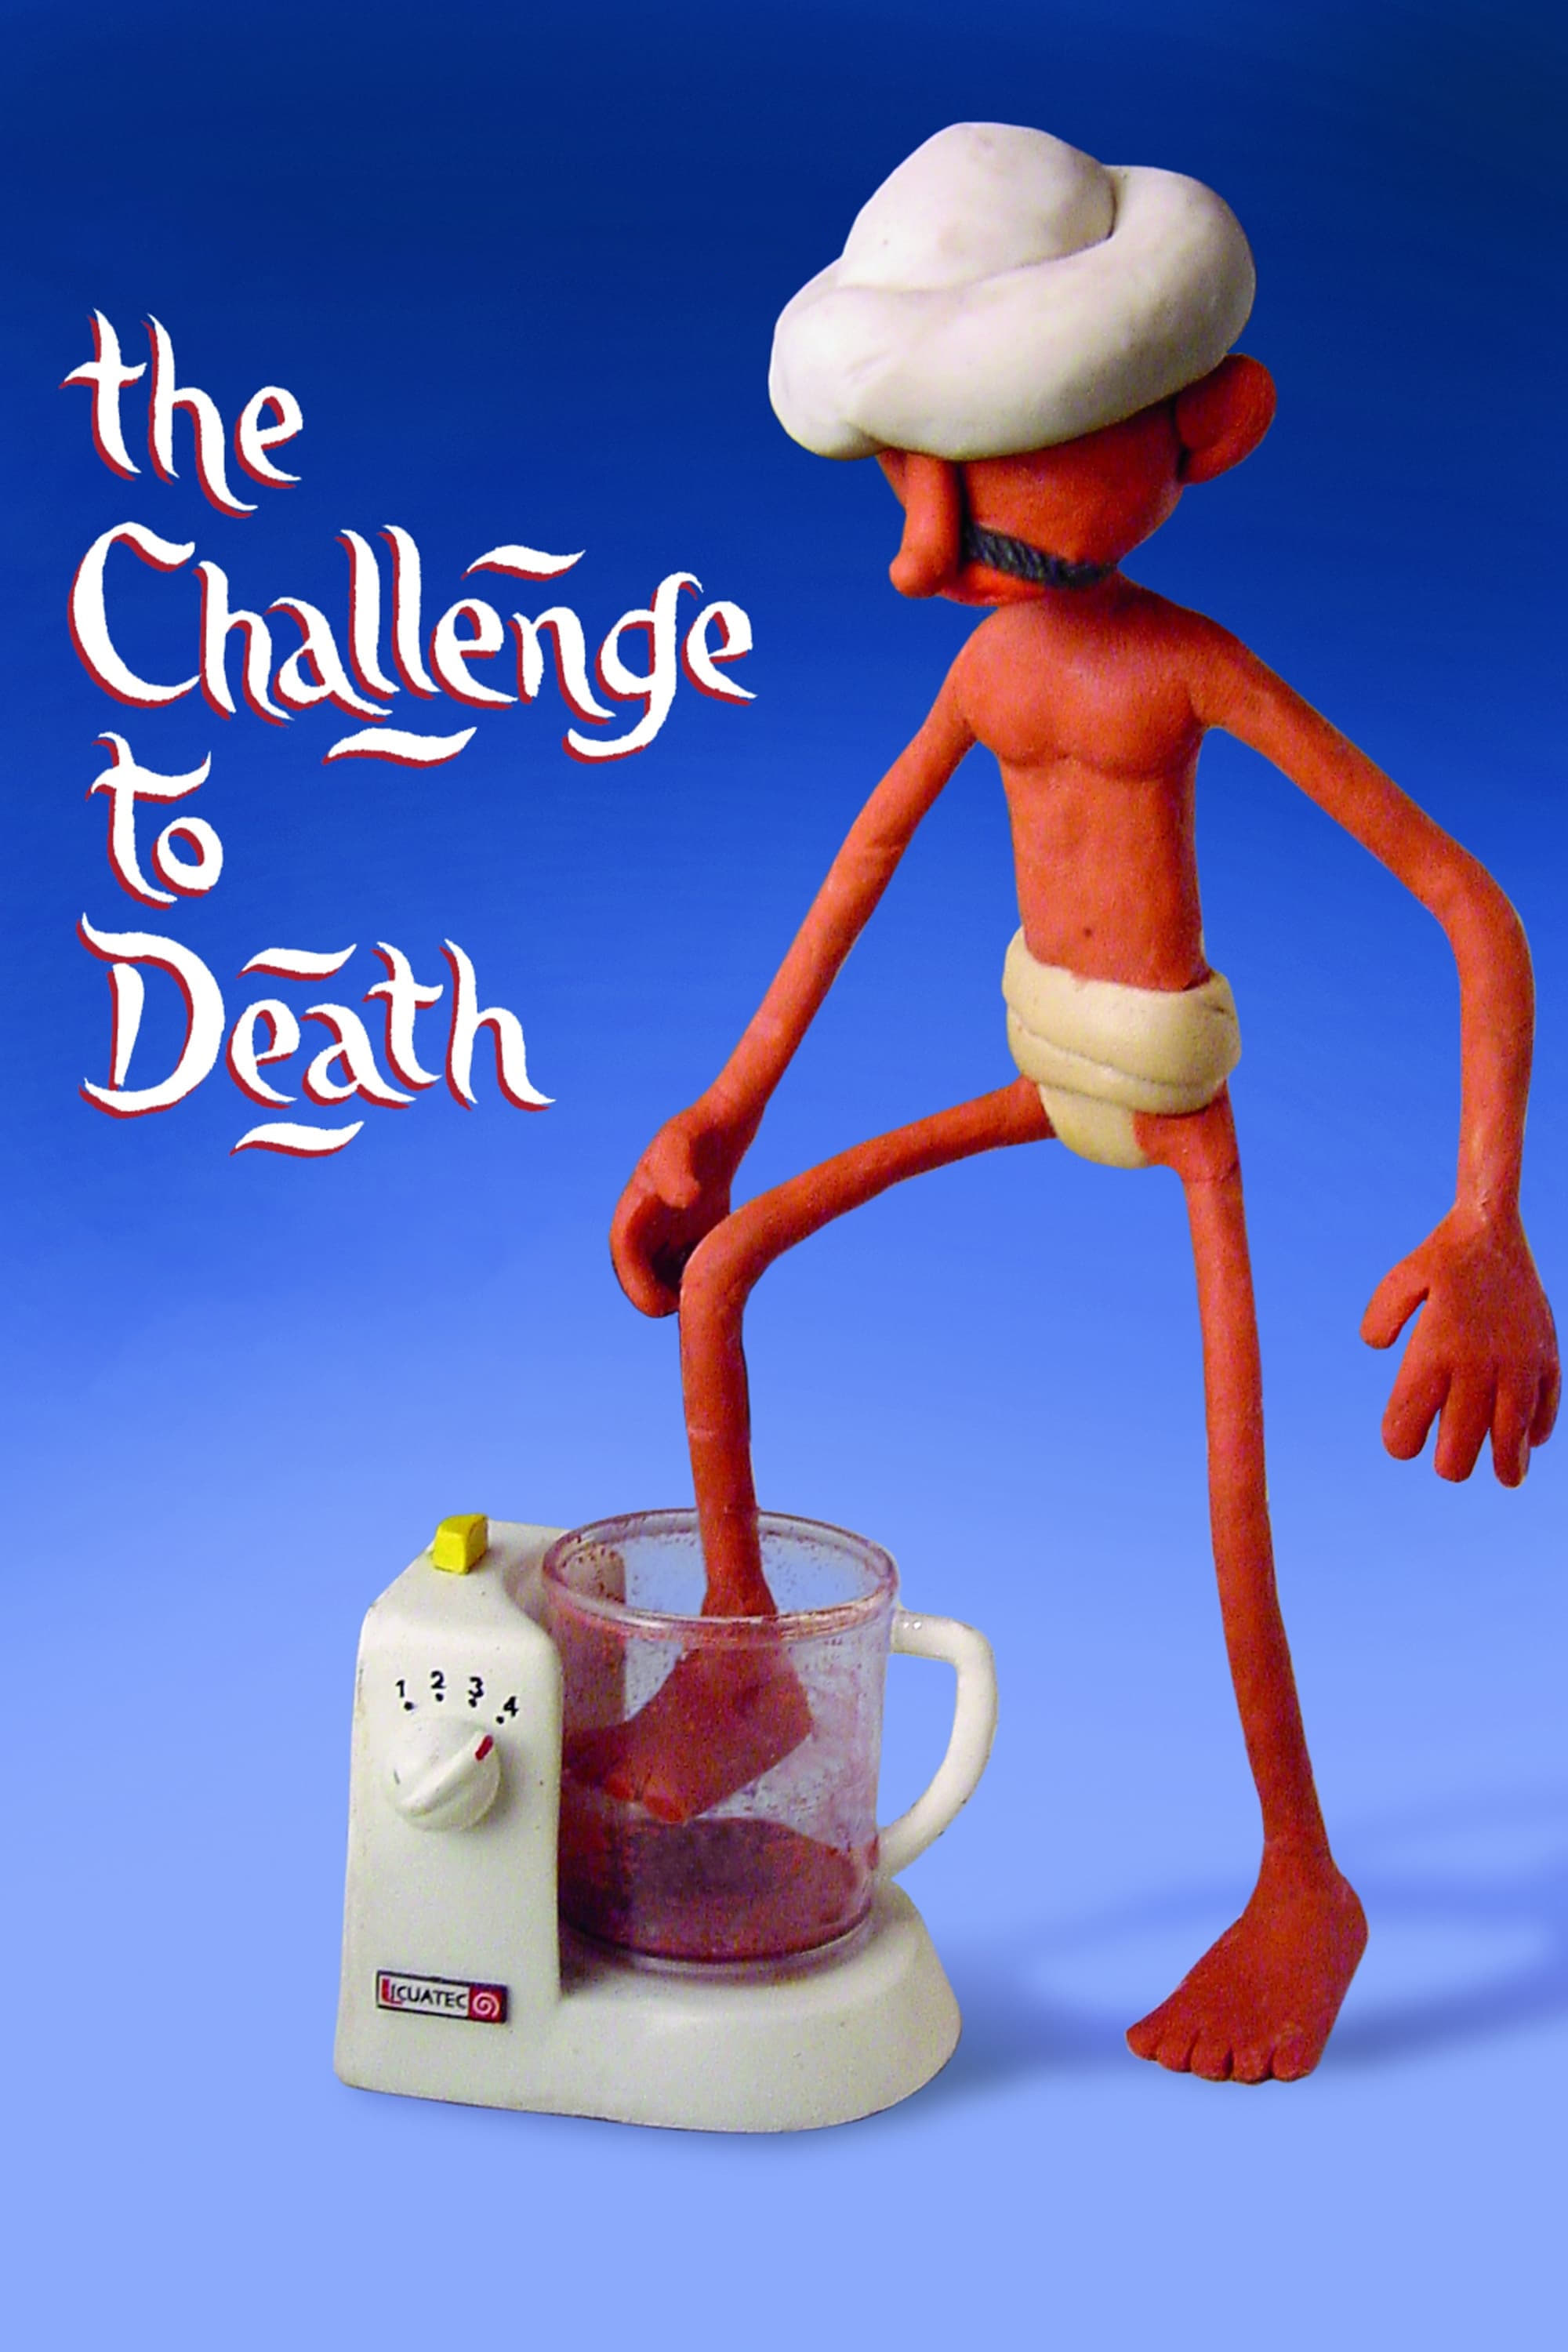 The Challenge to Death